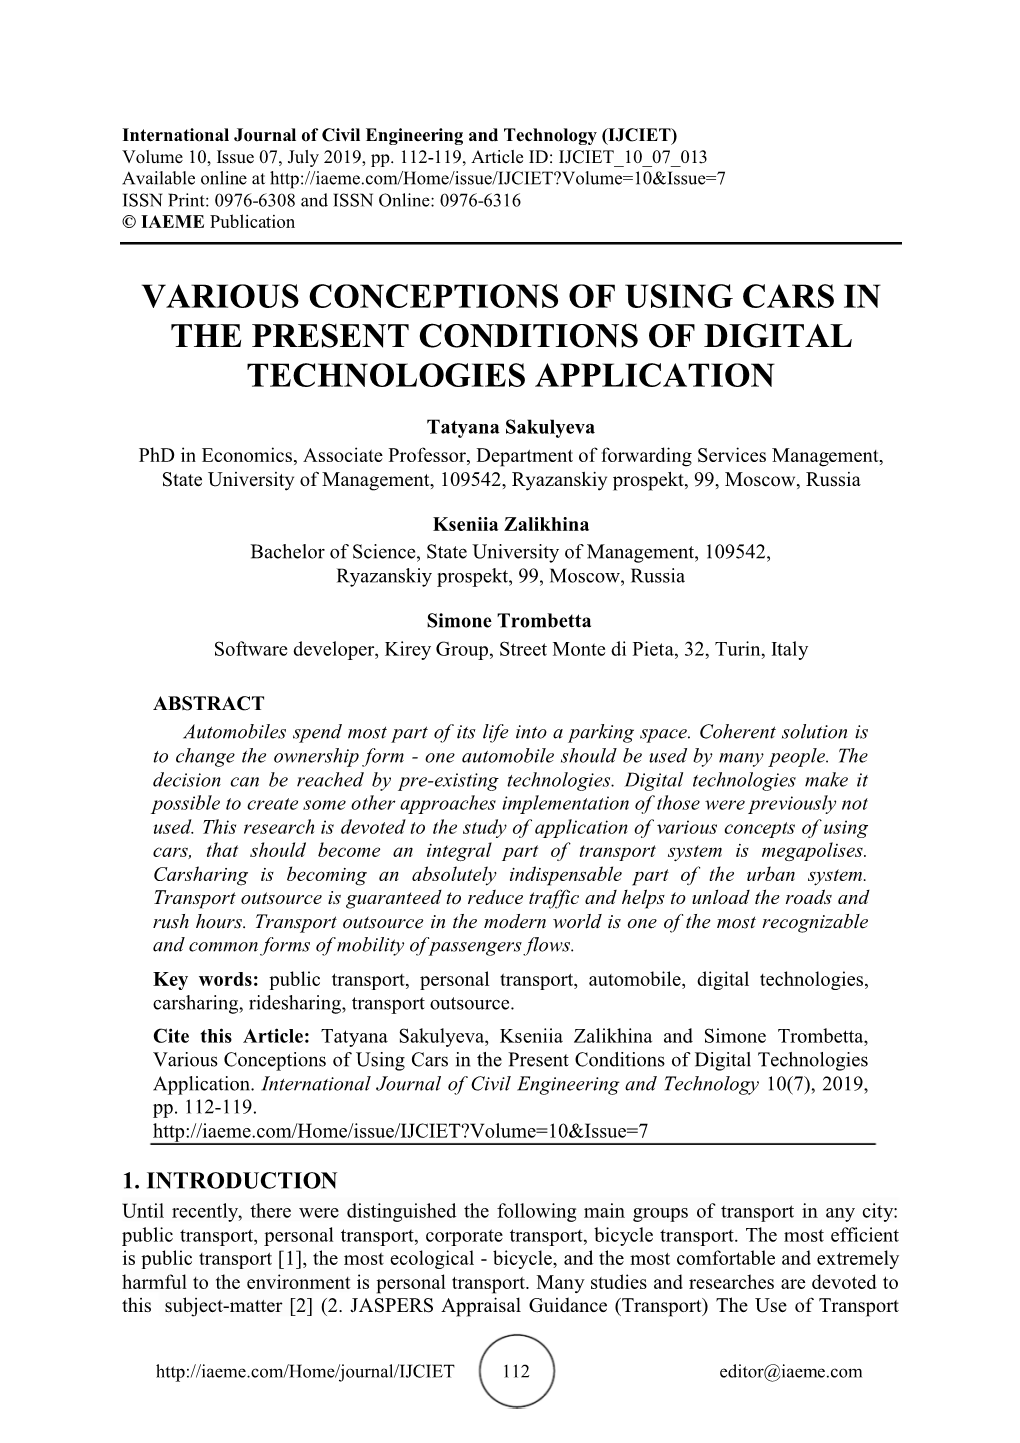 Various Conceptions of Using Cars in the Present Conditions of Digital Technologies Application